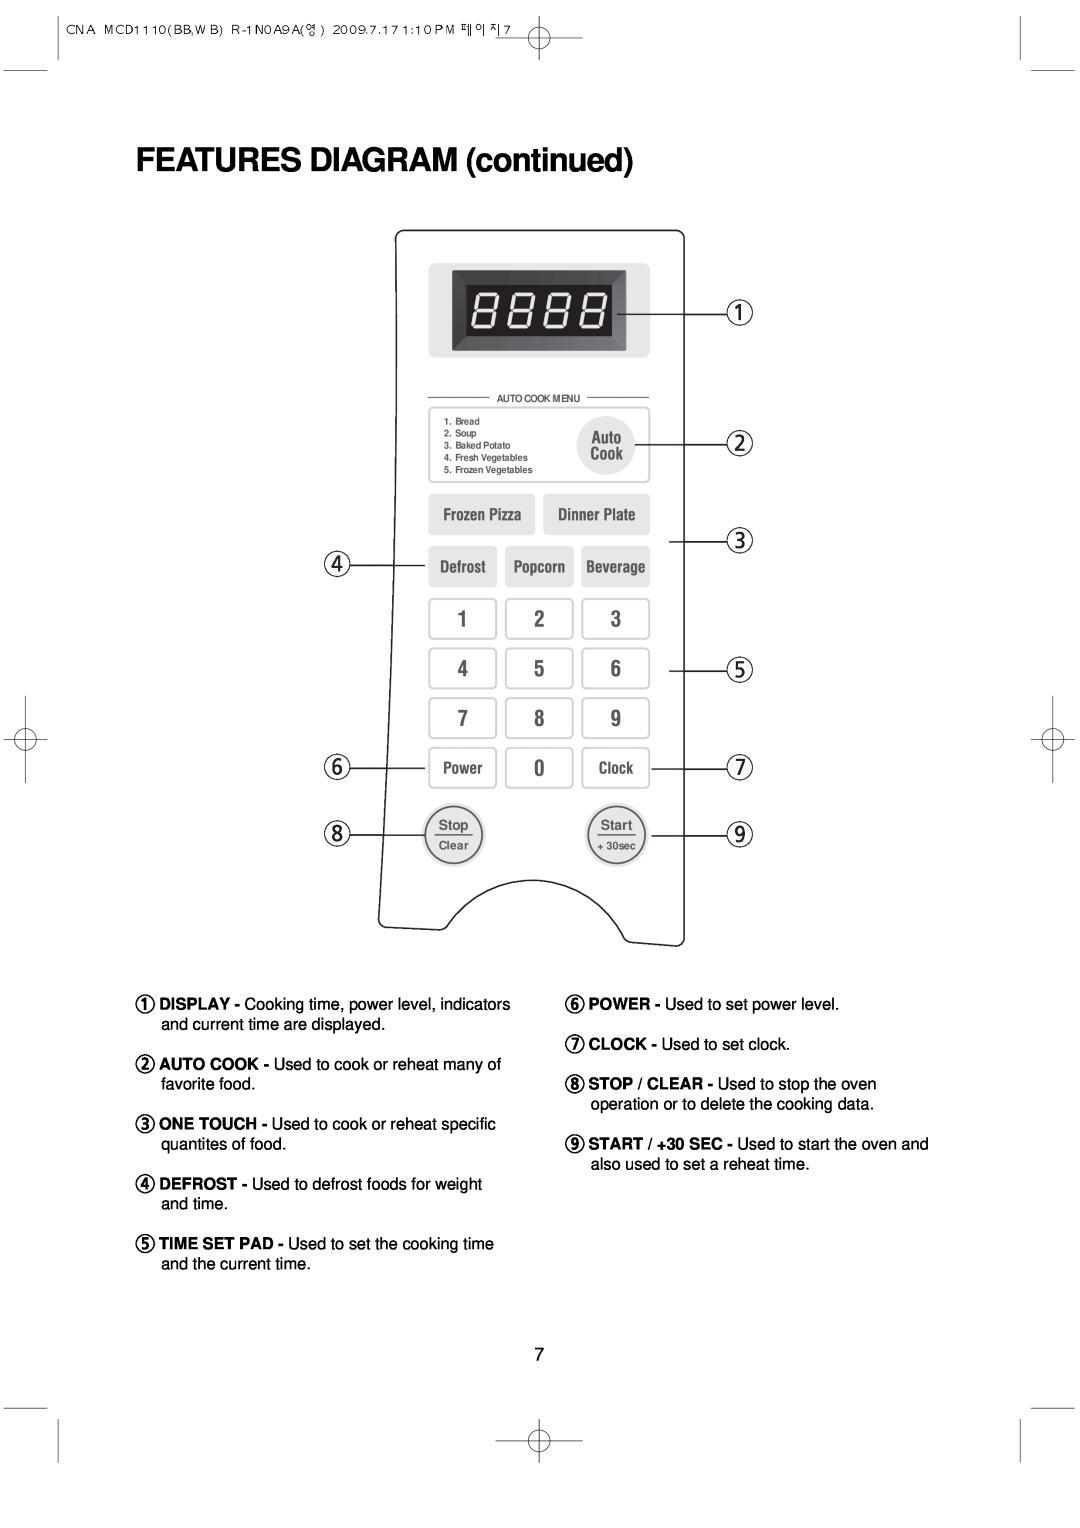 Magic Chef MCD1110WB manual FEATURES DIAGRAM continued, 1 2 3 5, StopStart 